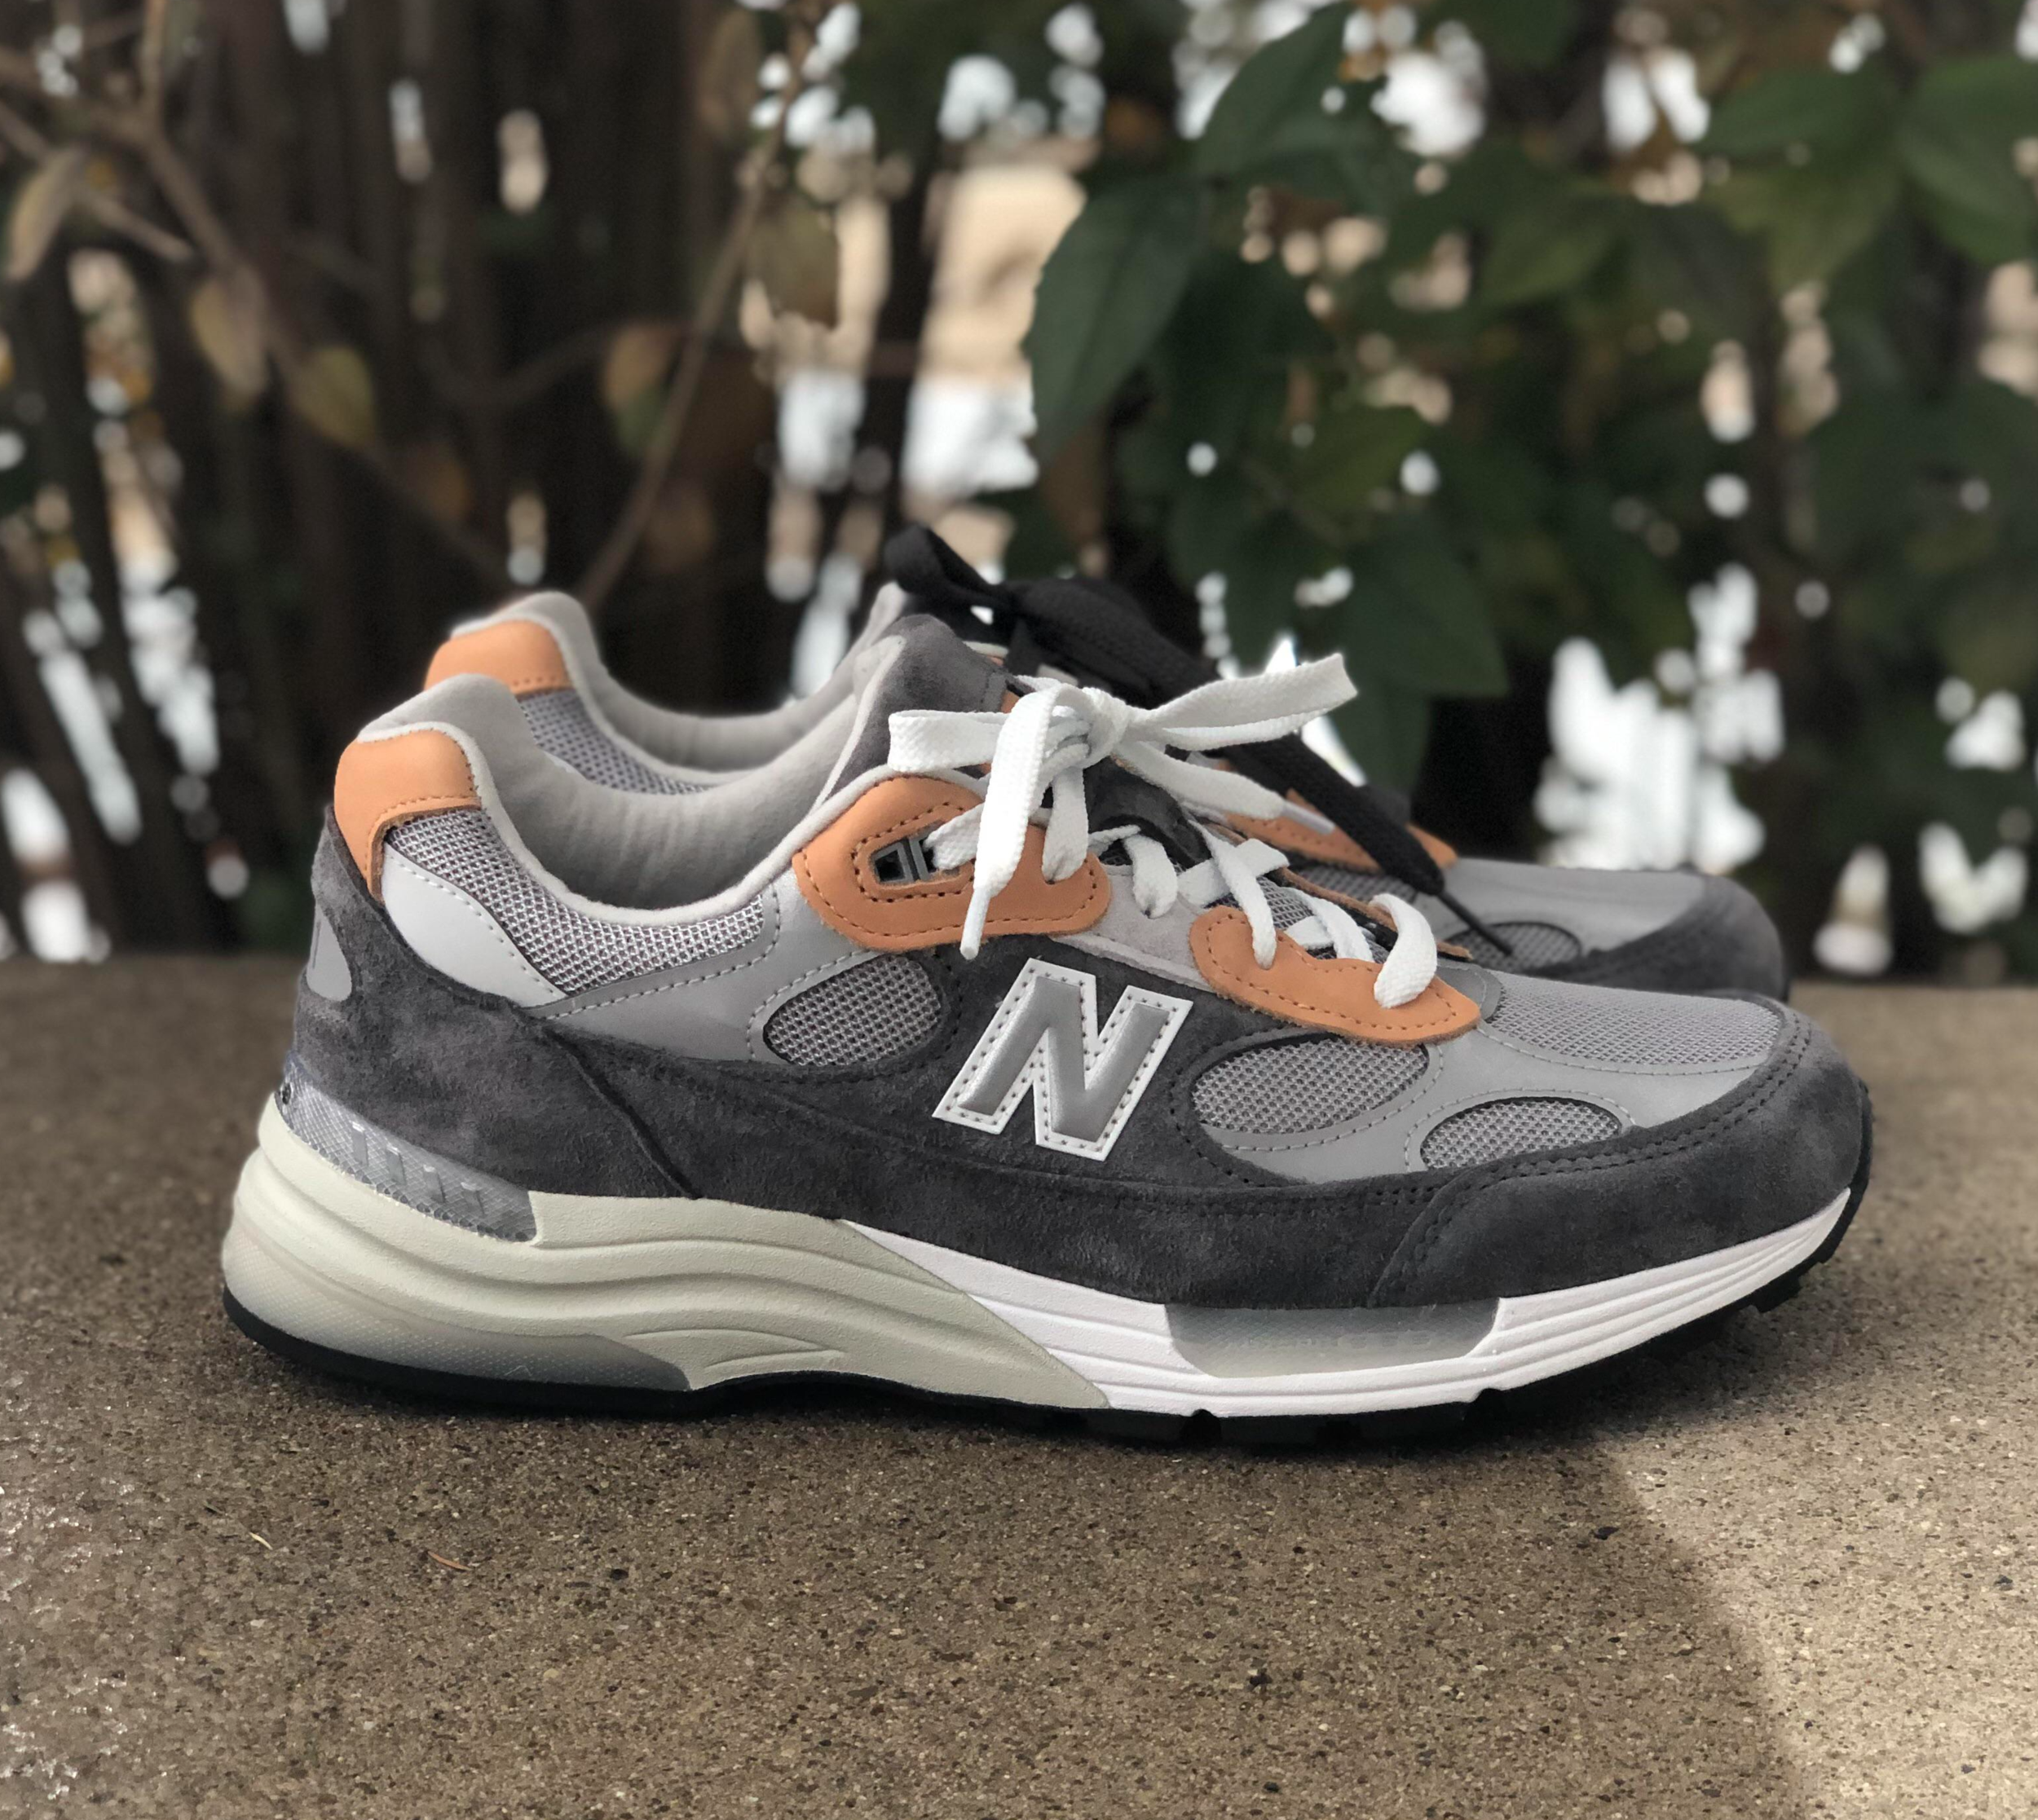 Now Available: Todd Snyder x New Balance 992 